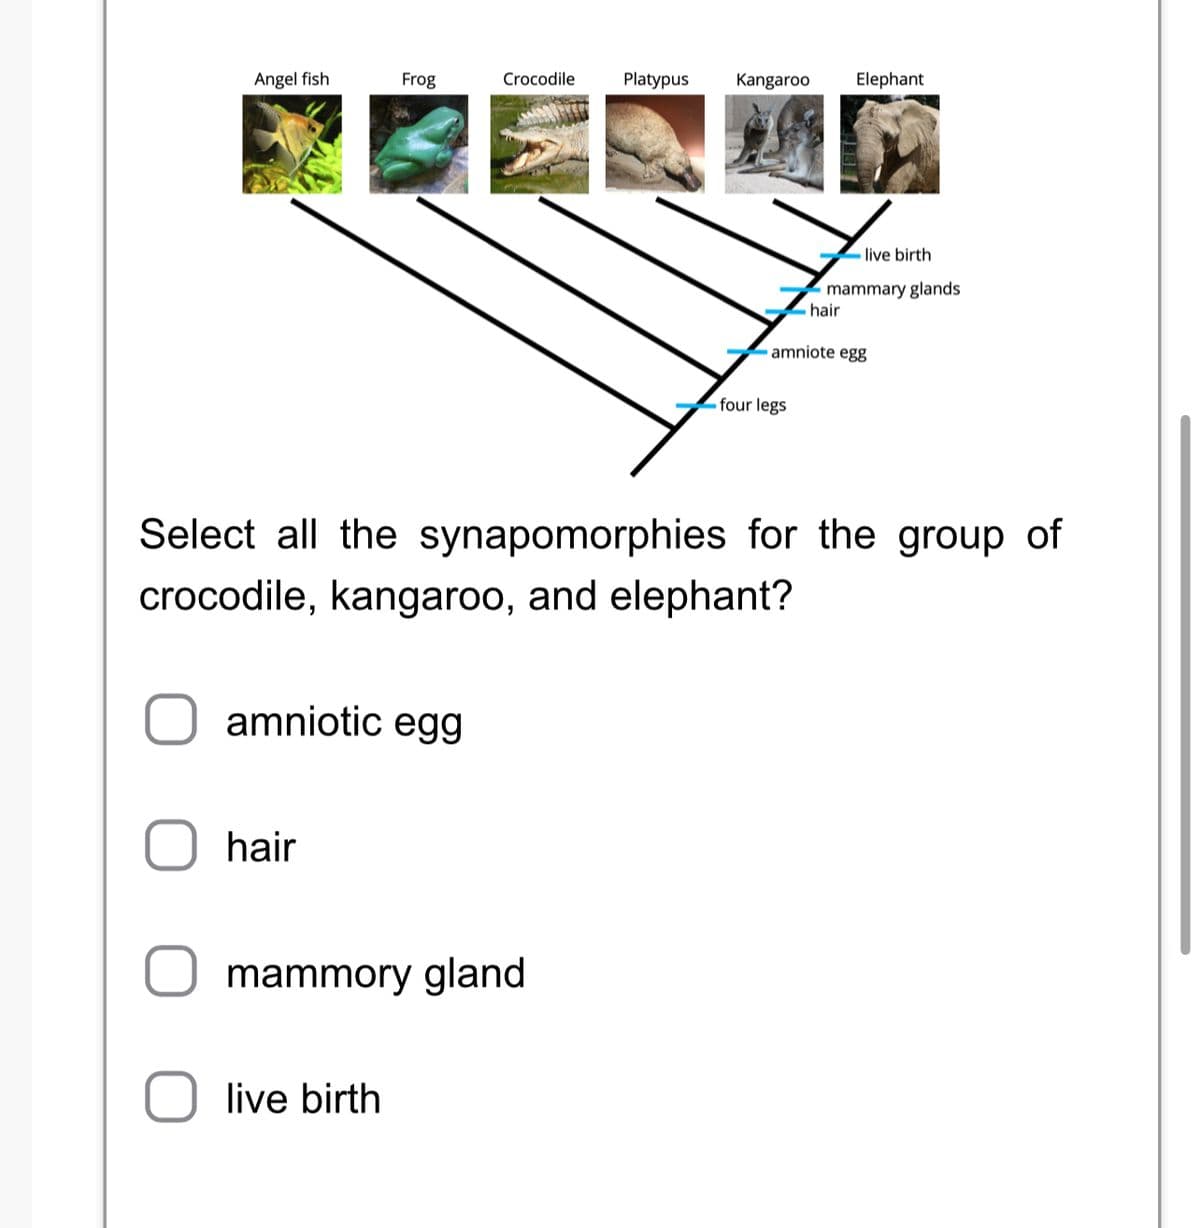 Angel fish
Frog
amniotic egg
hair
Crocodile
live birth
mammory gland
Platypus Kangaroo Elephant
Select all the synapomorphies for the group of
crocodile, kangaroo, and elephant?
live birth
mammary glands
four legs
hair.
amniote egg